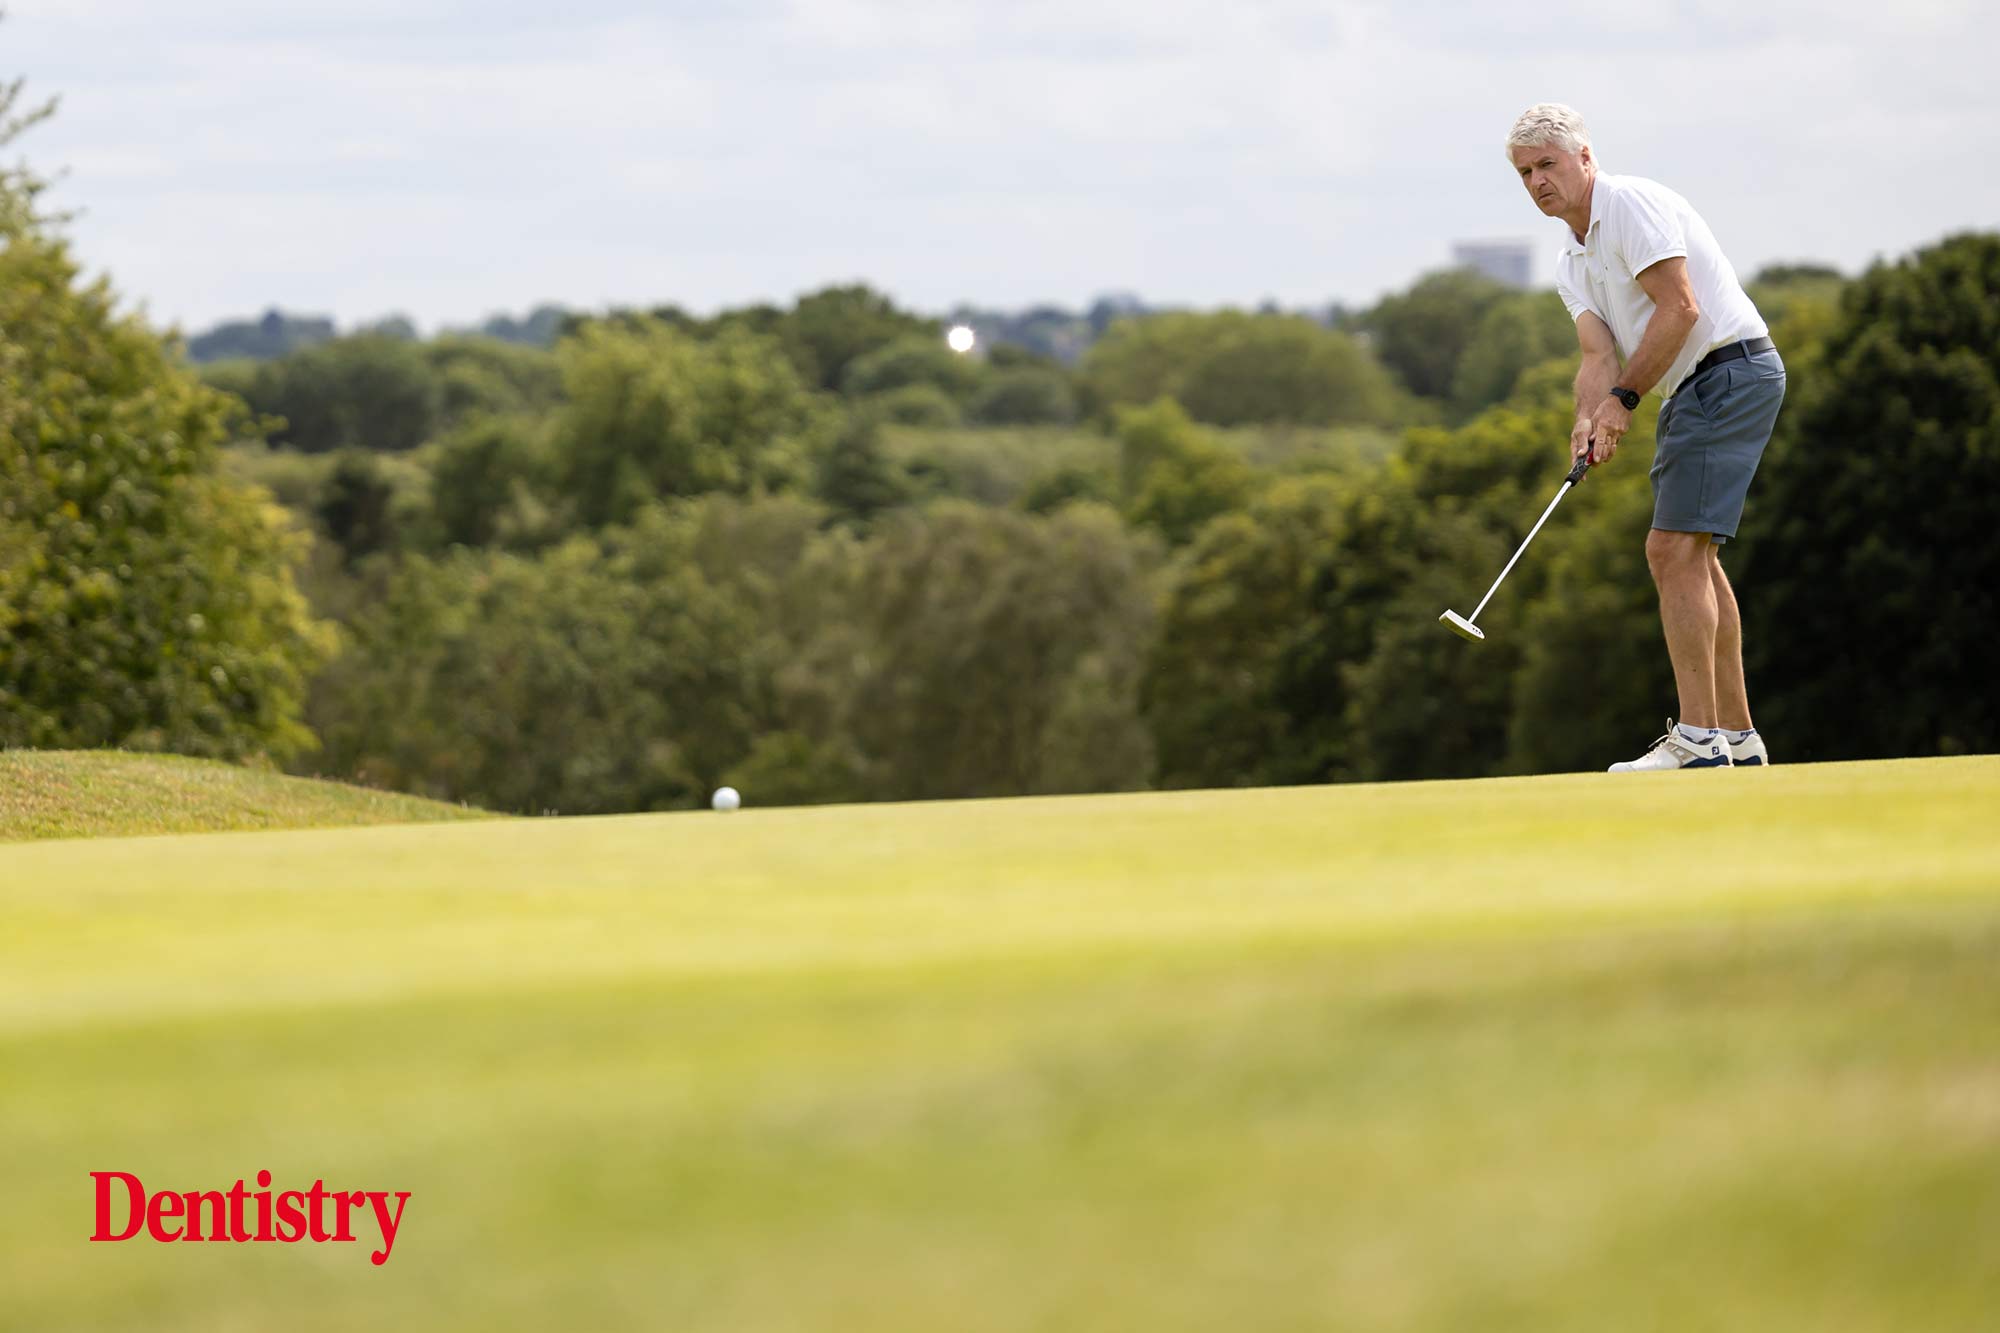 The UK Dentistry Golf Championship was held last month, bringing the trade and profession together for some friendly competition and networking. Here’s how the day unfolded...